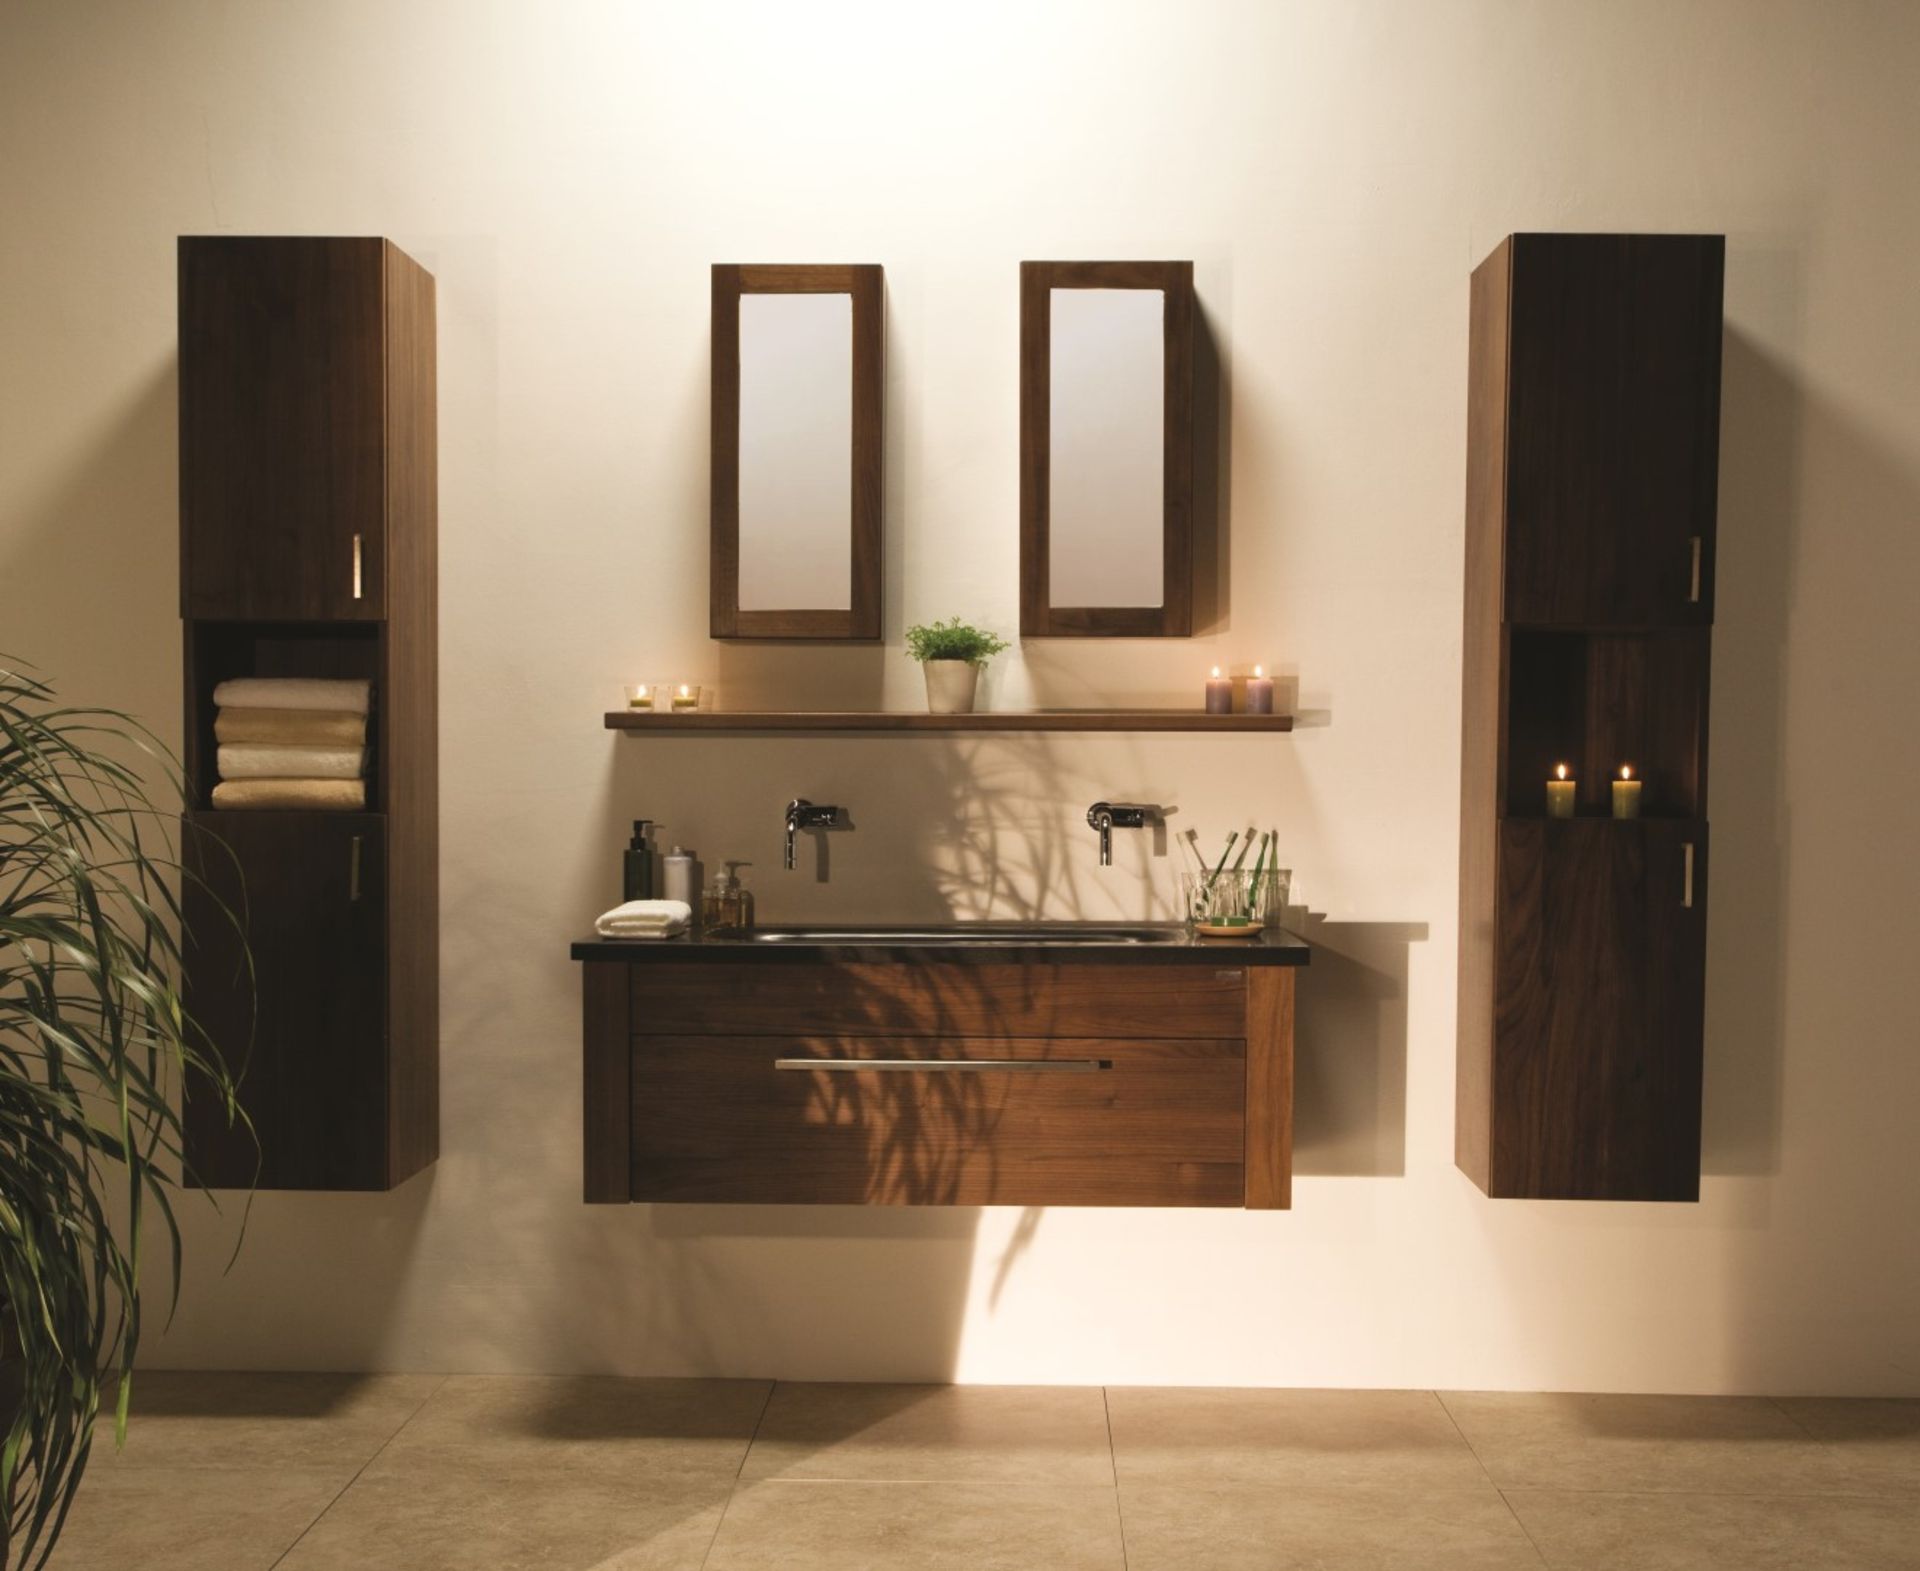 1 x Stonearth Bathroom Storage Shelf With Concealed Brackets - American Solid Walnut - Size: 600mm - Image 3 of 16